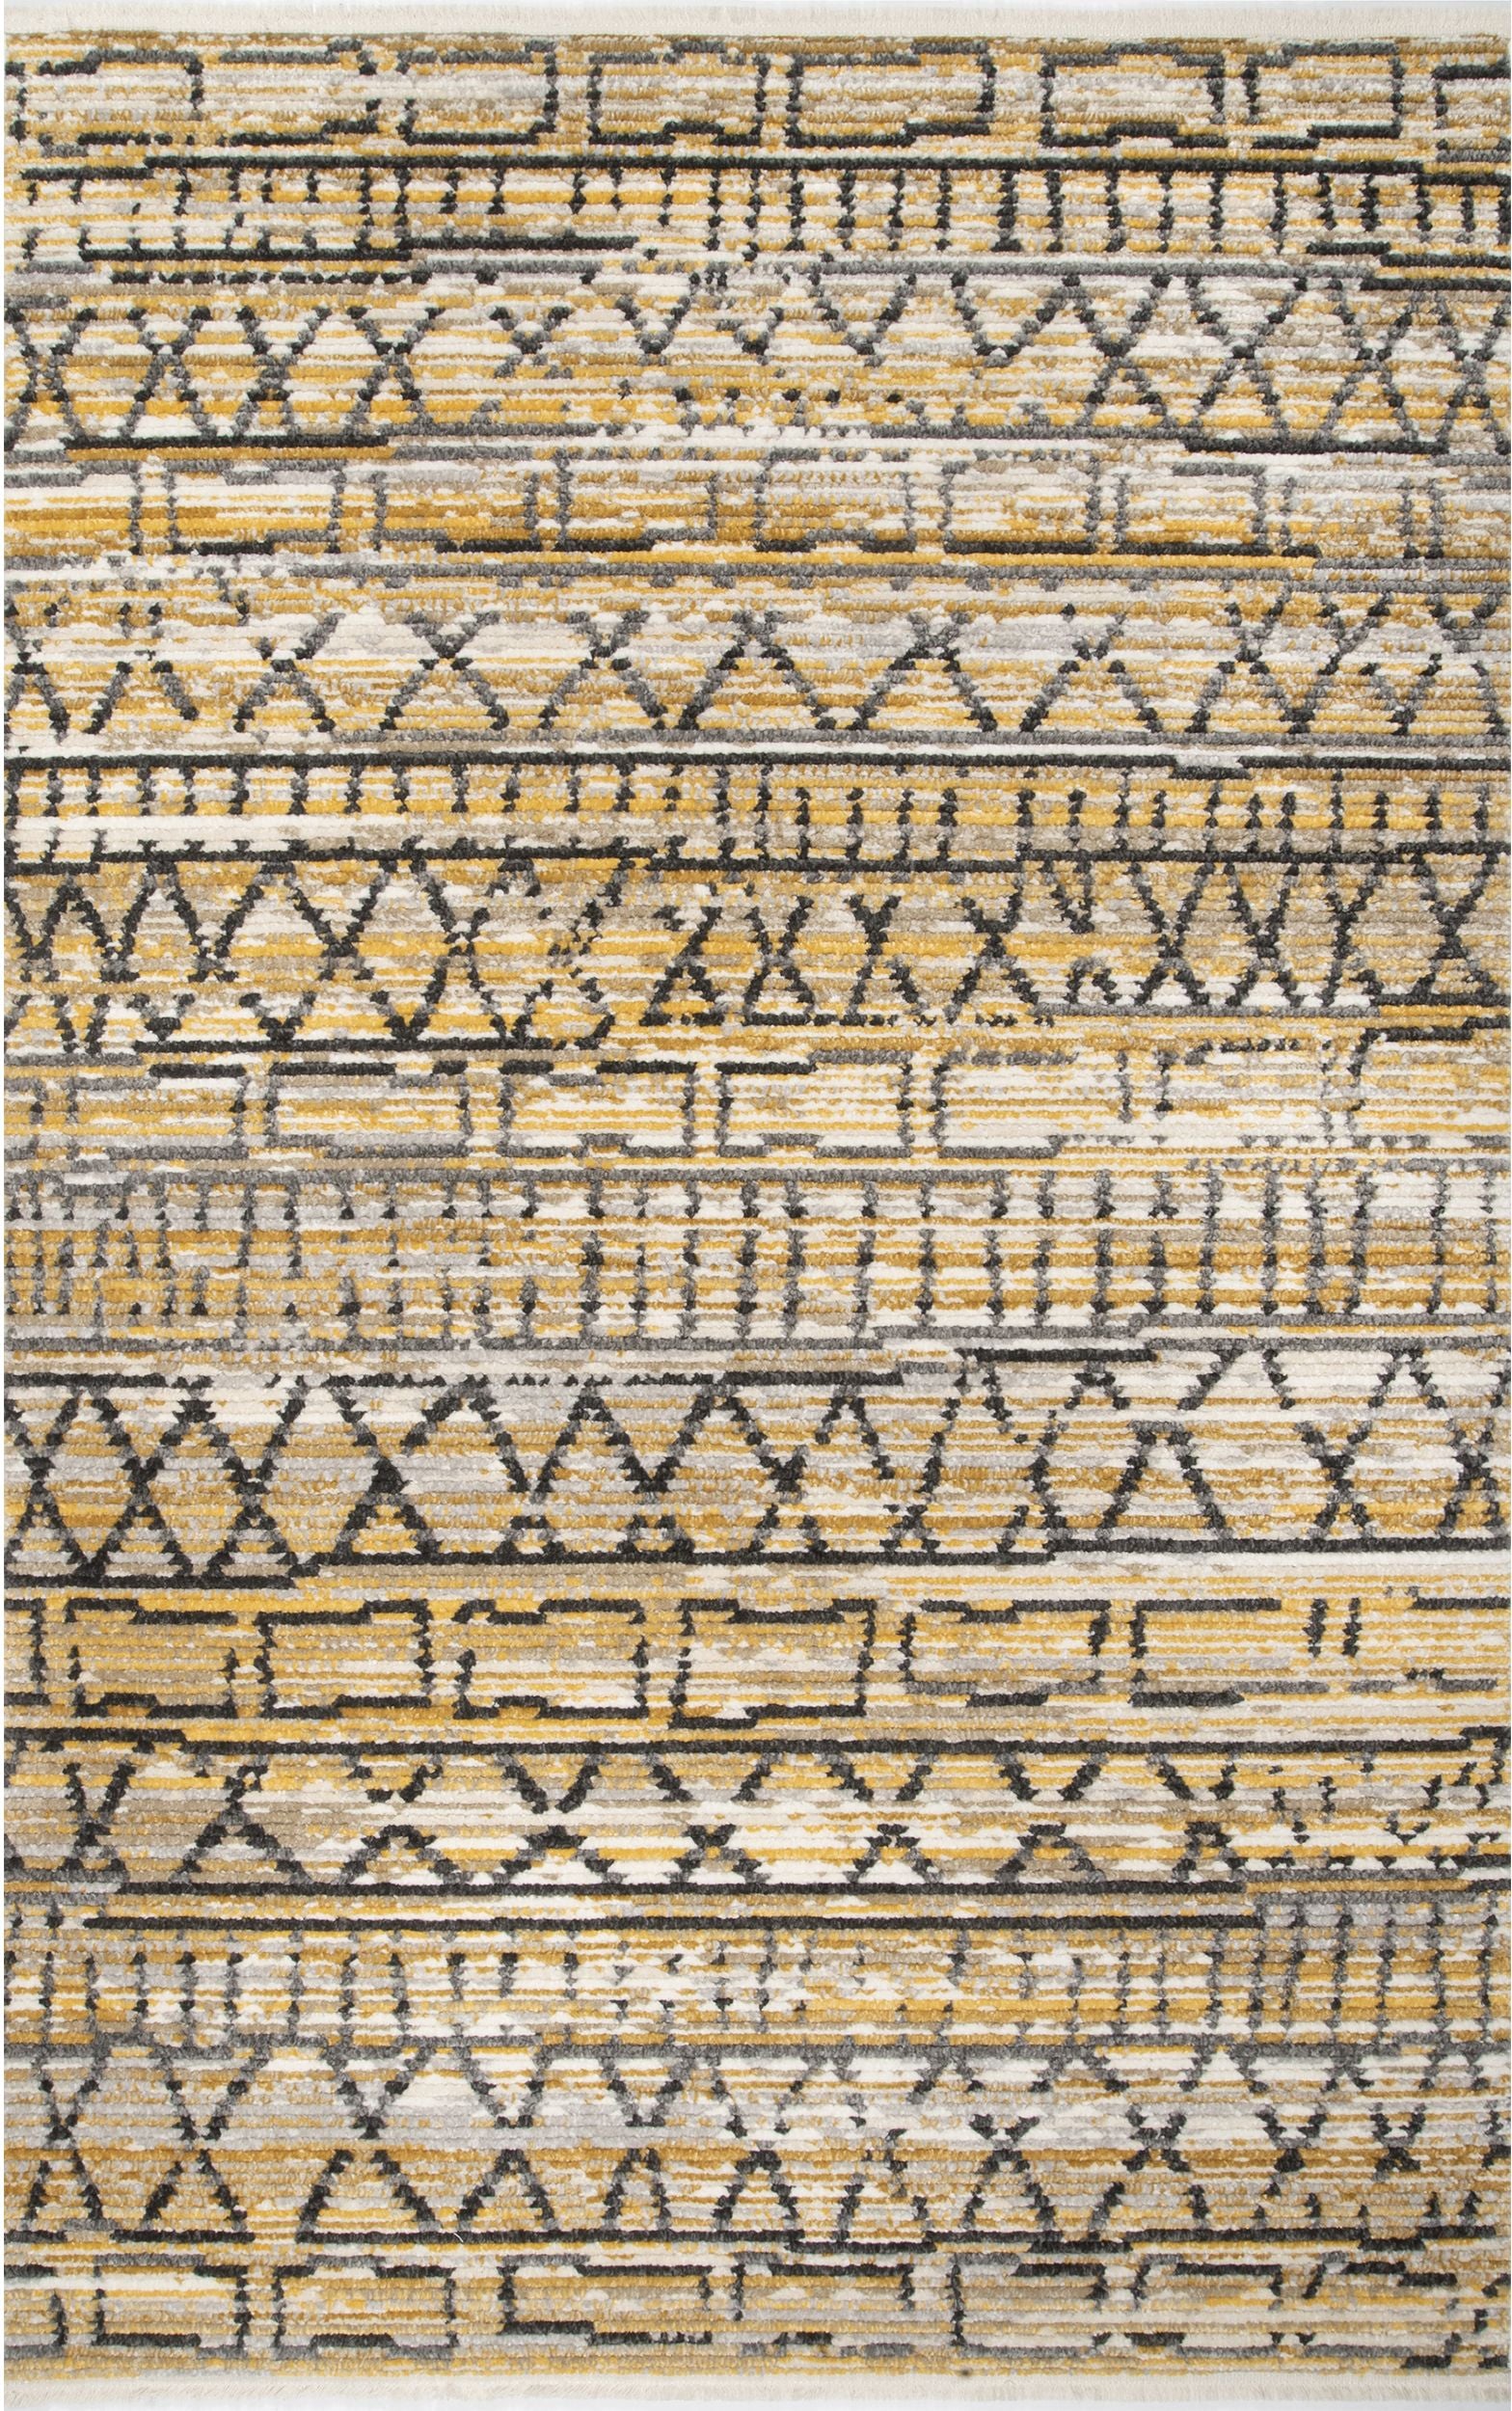 Nuloom Maisie Banded Tribal Nma1589A Beige Area Rug